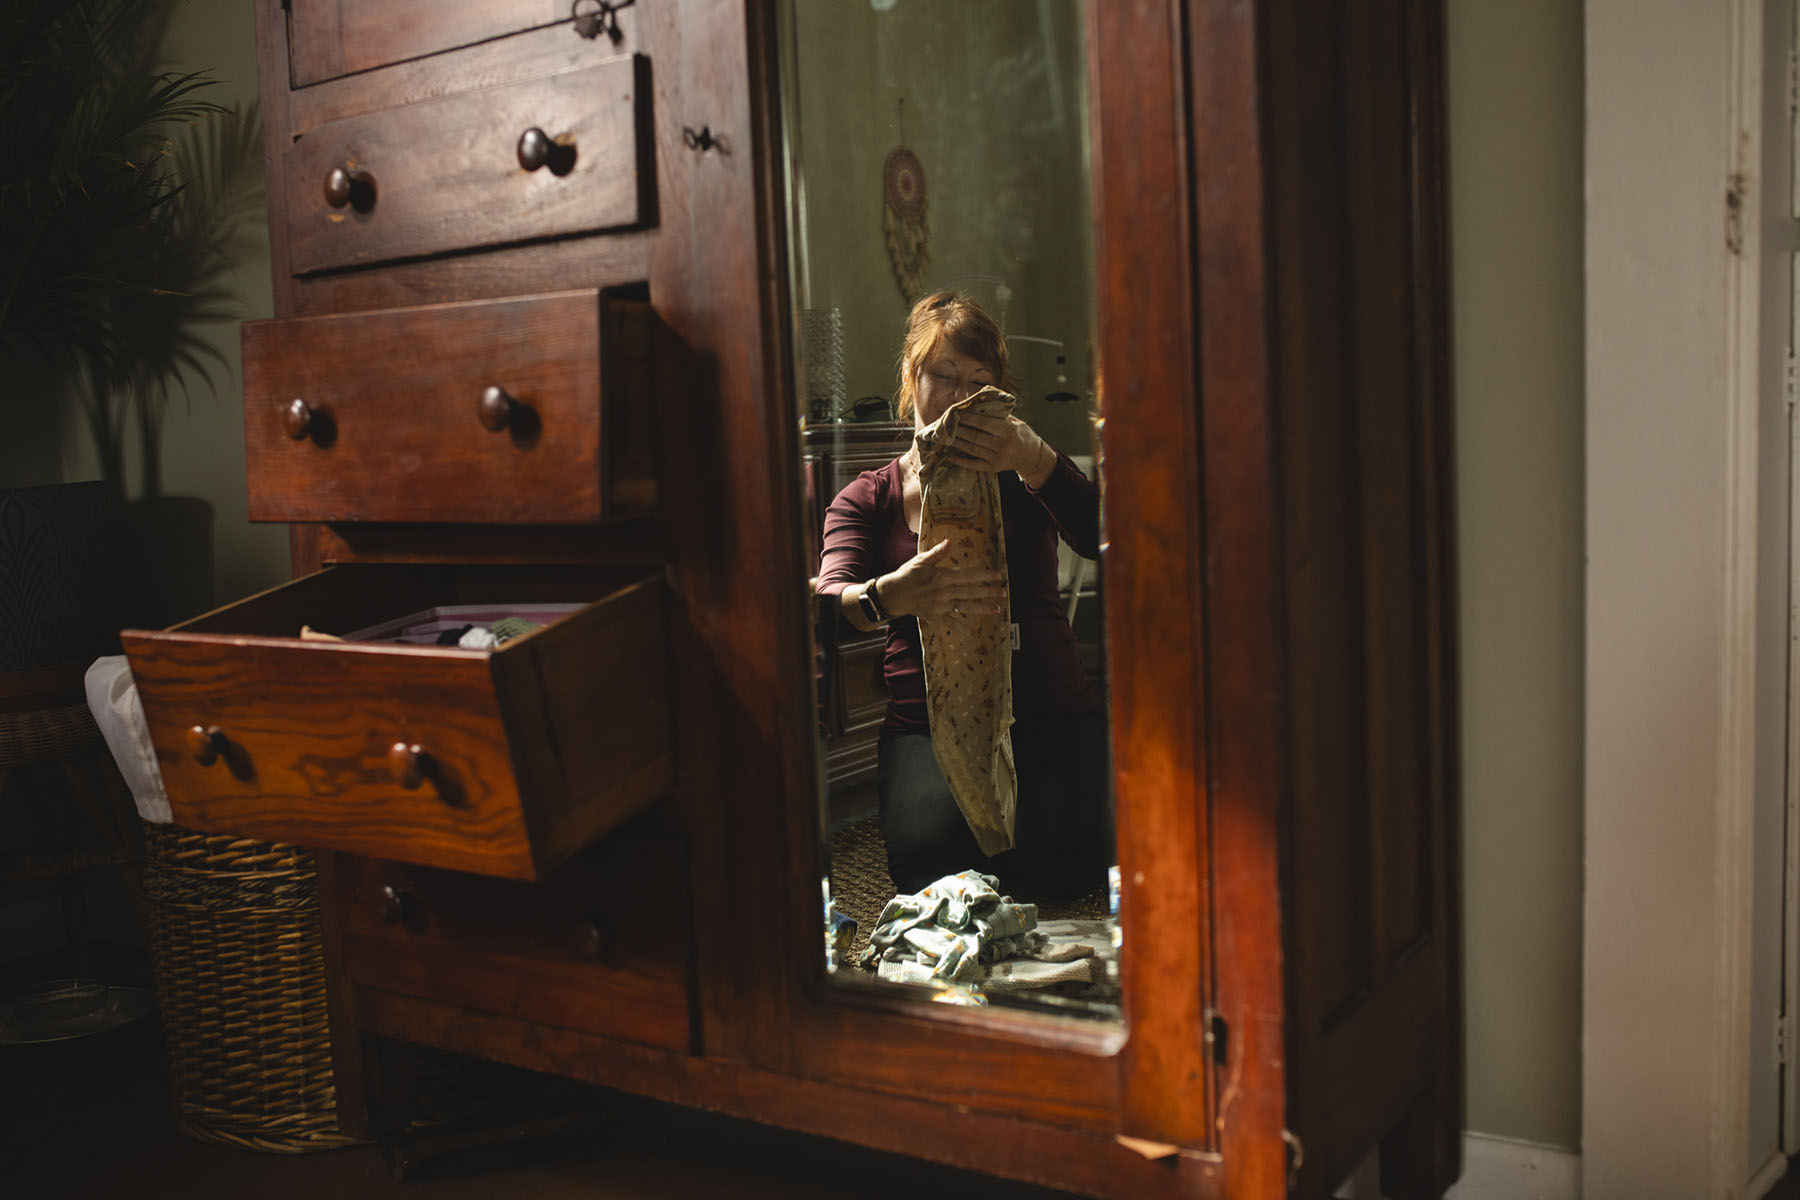 Toups is seen in a mirror as she folds baby clothes while sitting on the floor at her home.